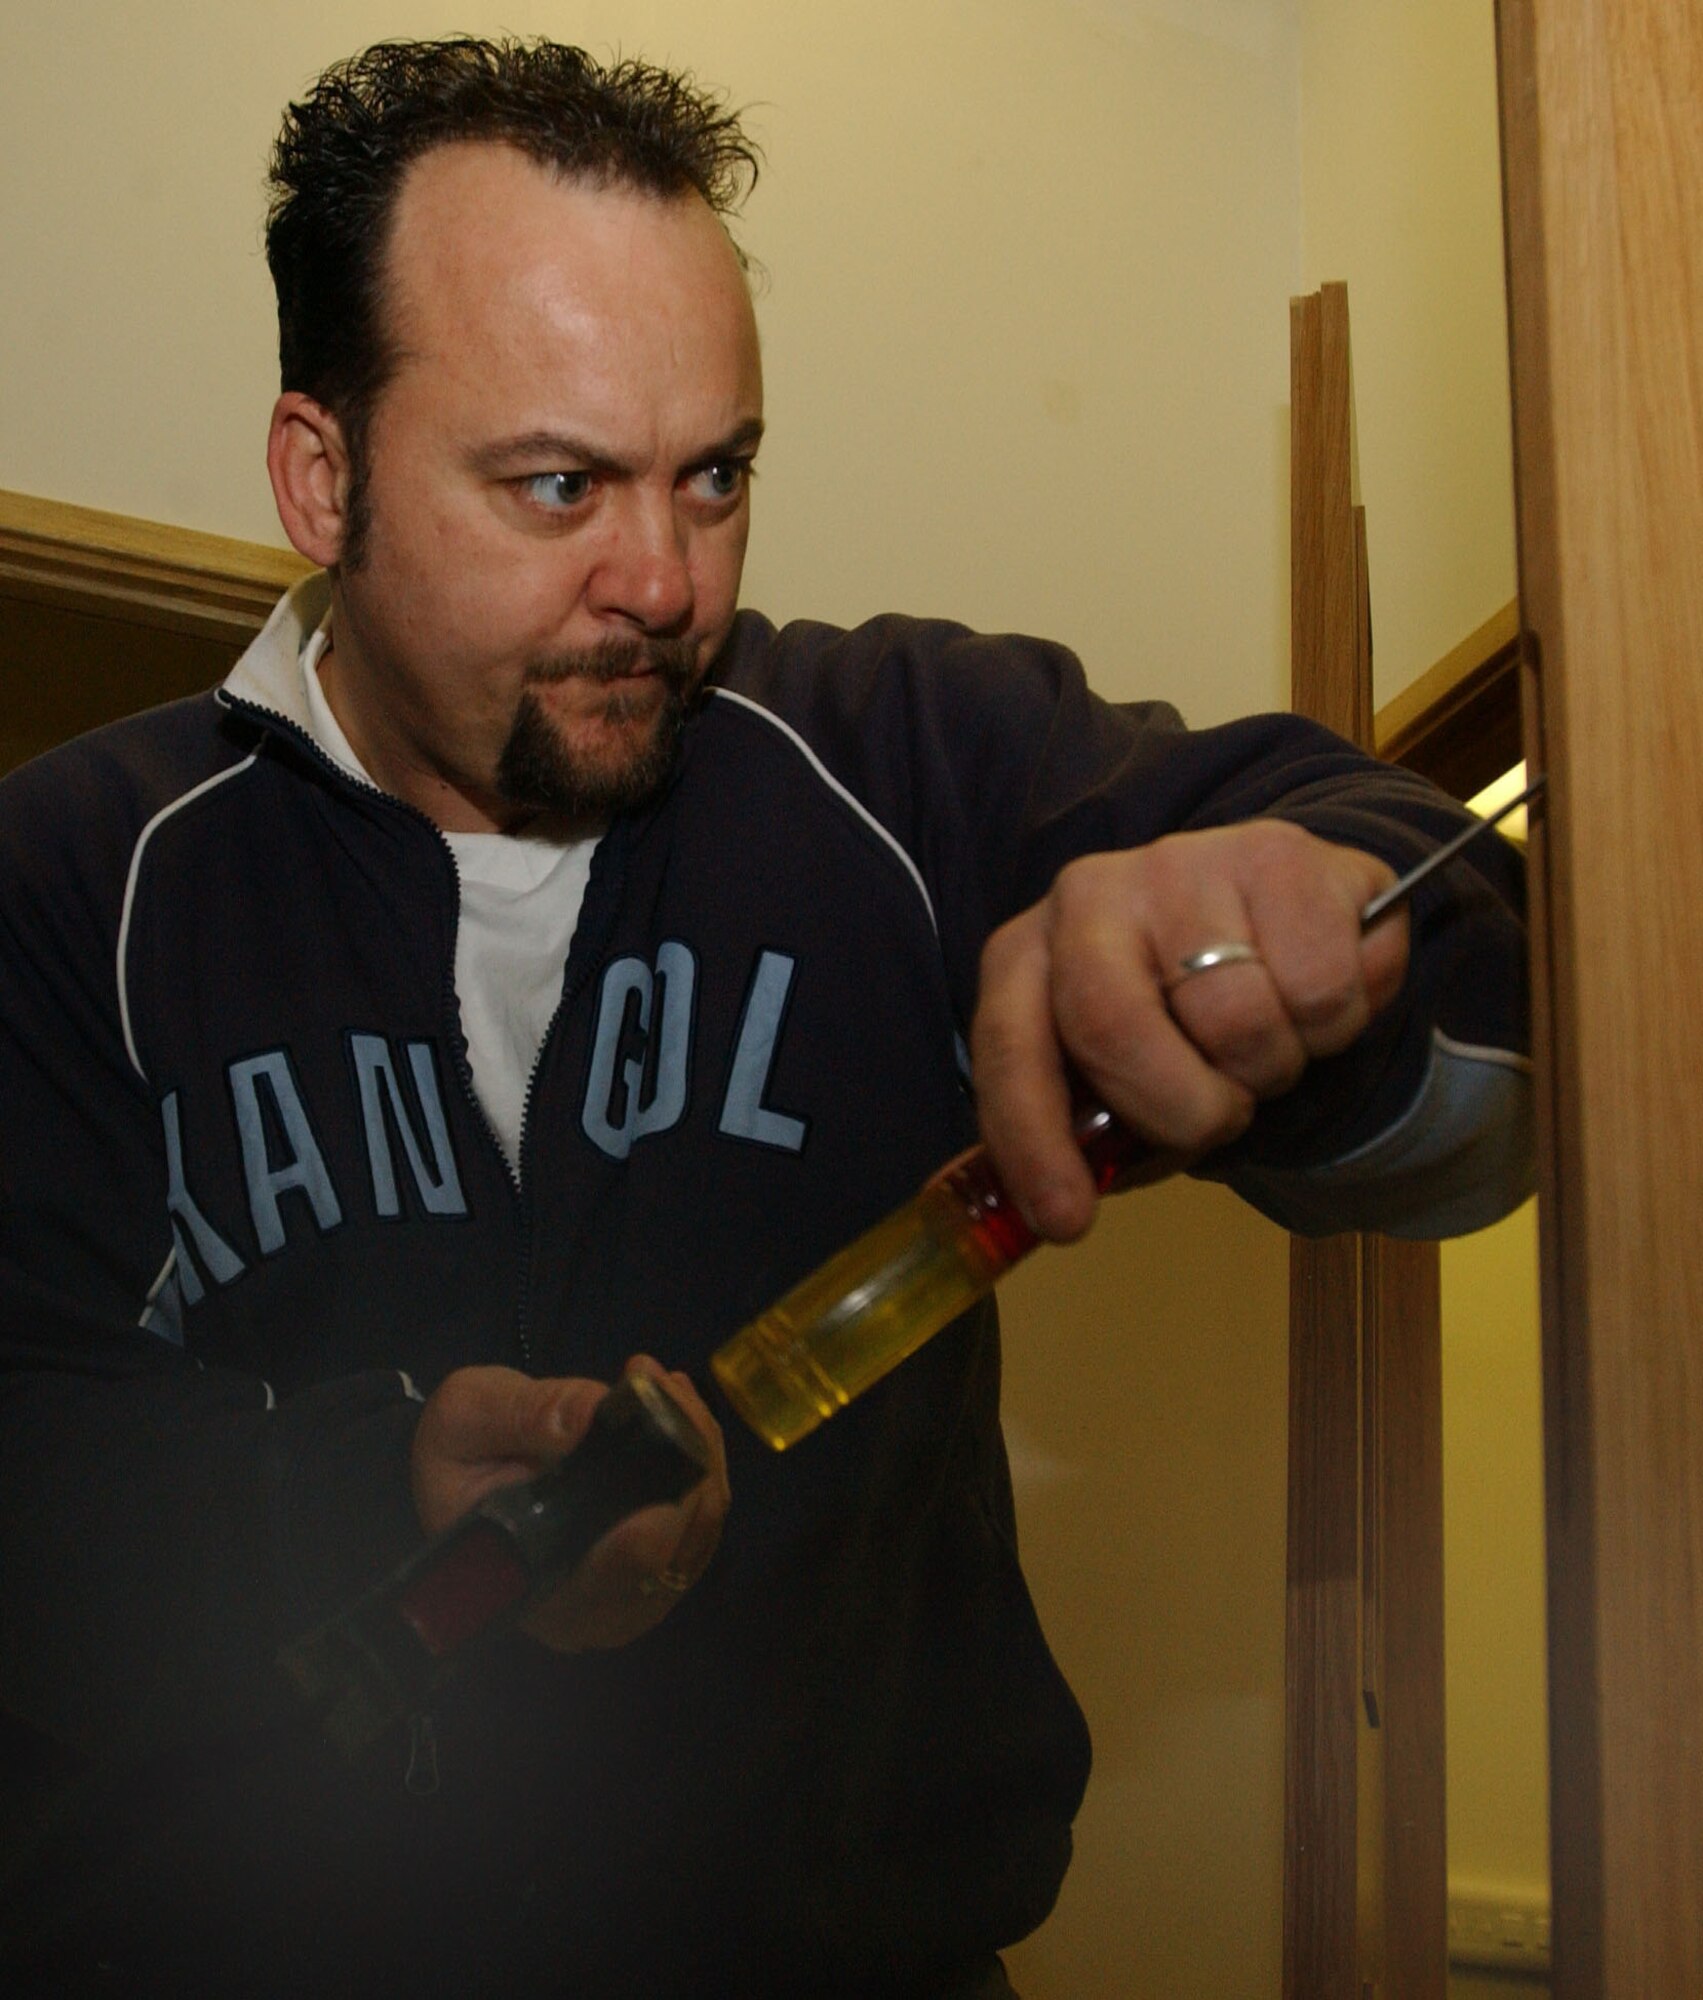 John Cooper, 100th Civil Engineer Squadron Lock Shop, and a Ministry of Defence civilian, chisels out part of the door edge, before installing an Assa mortice lock on a conference room door March 14, 2007, in the 95th Reconnaissance Squadron, in Building 707. The lock smiths often have to make minor adjustments to doors and fittings to ensure locks fit properly and are secure. (U.S. Air Force photo by Airman Brad Smith)                                                               